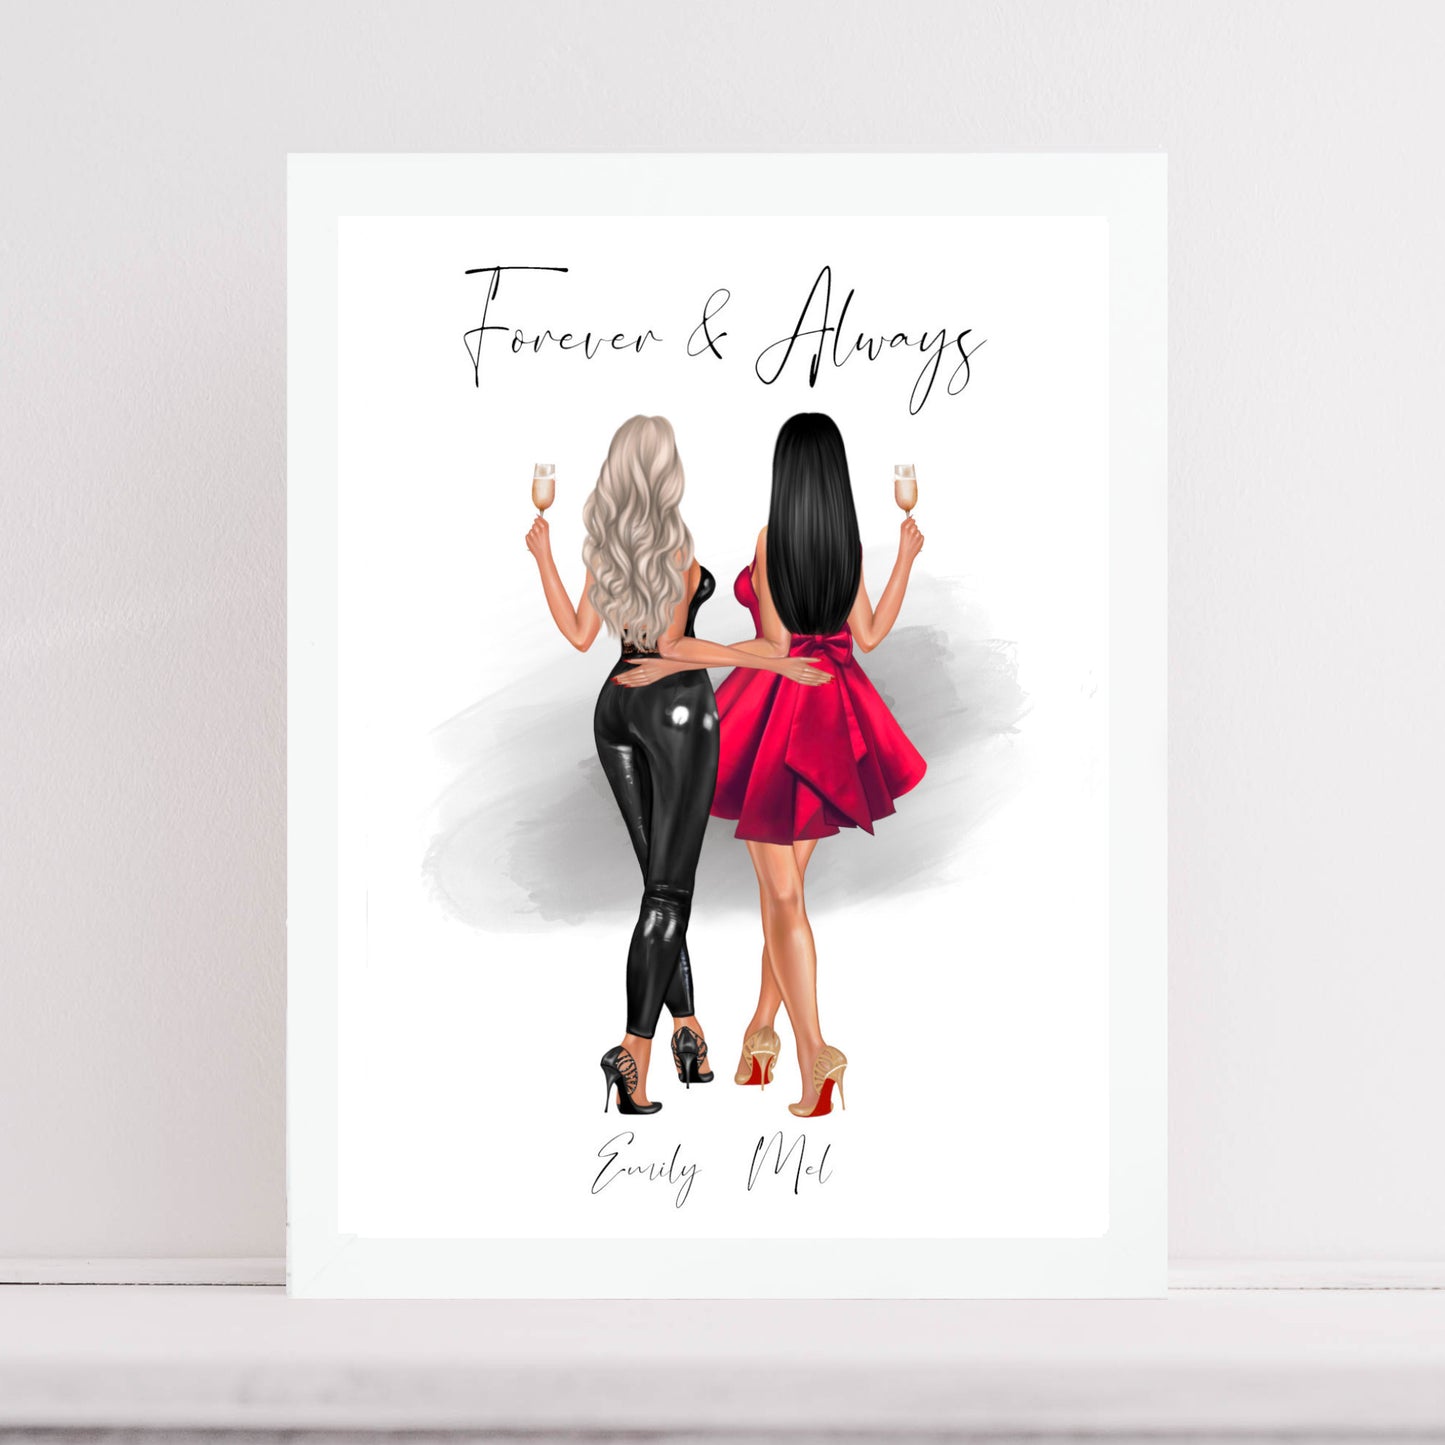 Personalised Best Friend Illustration Print - Girls night out